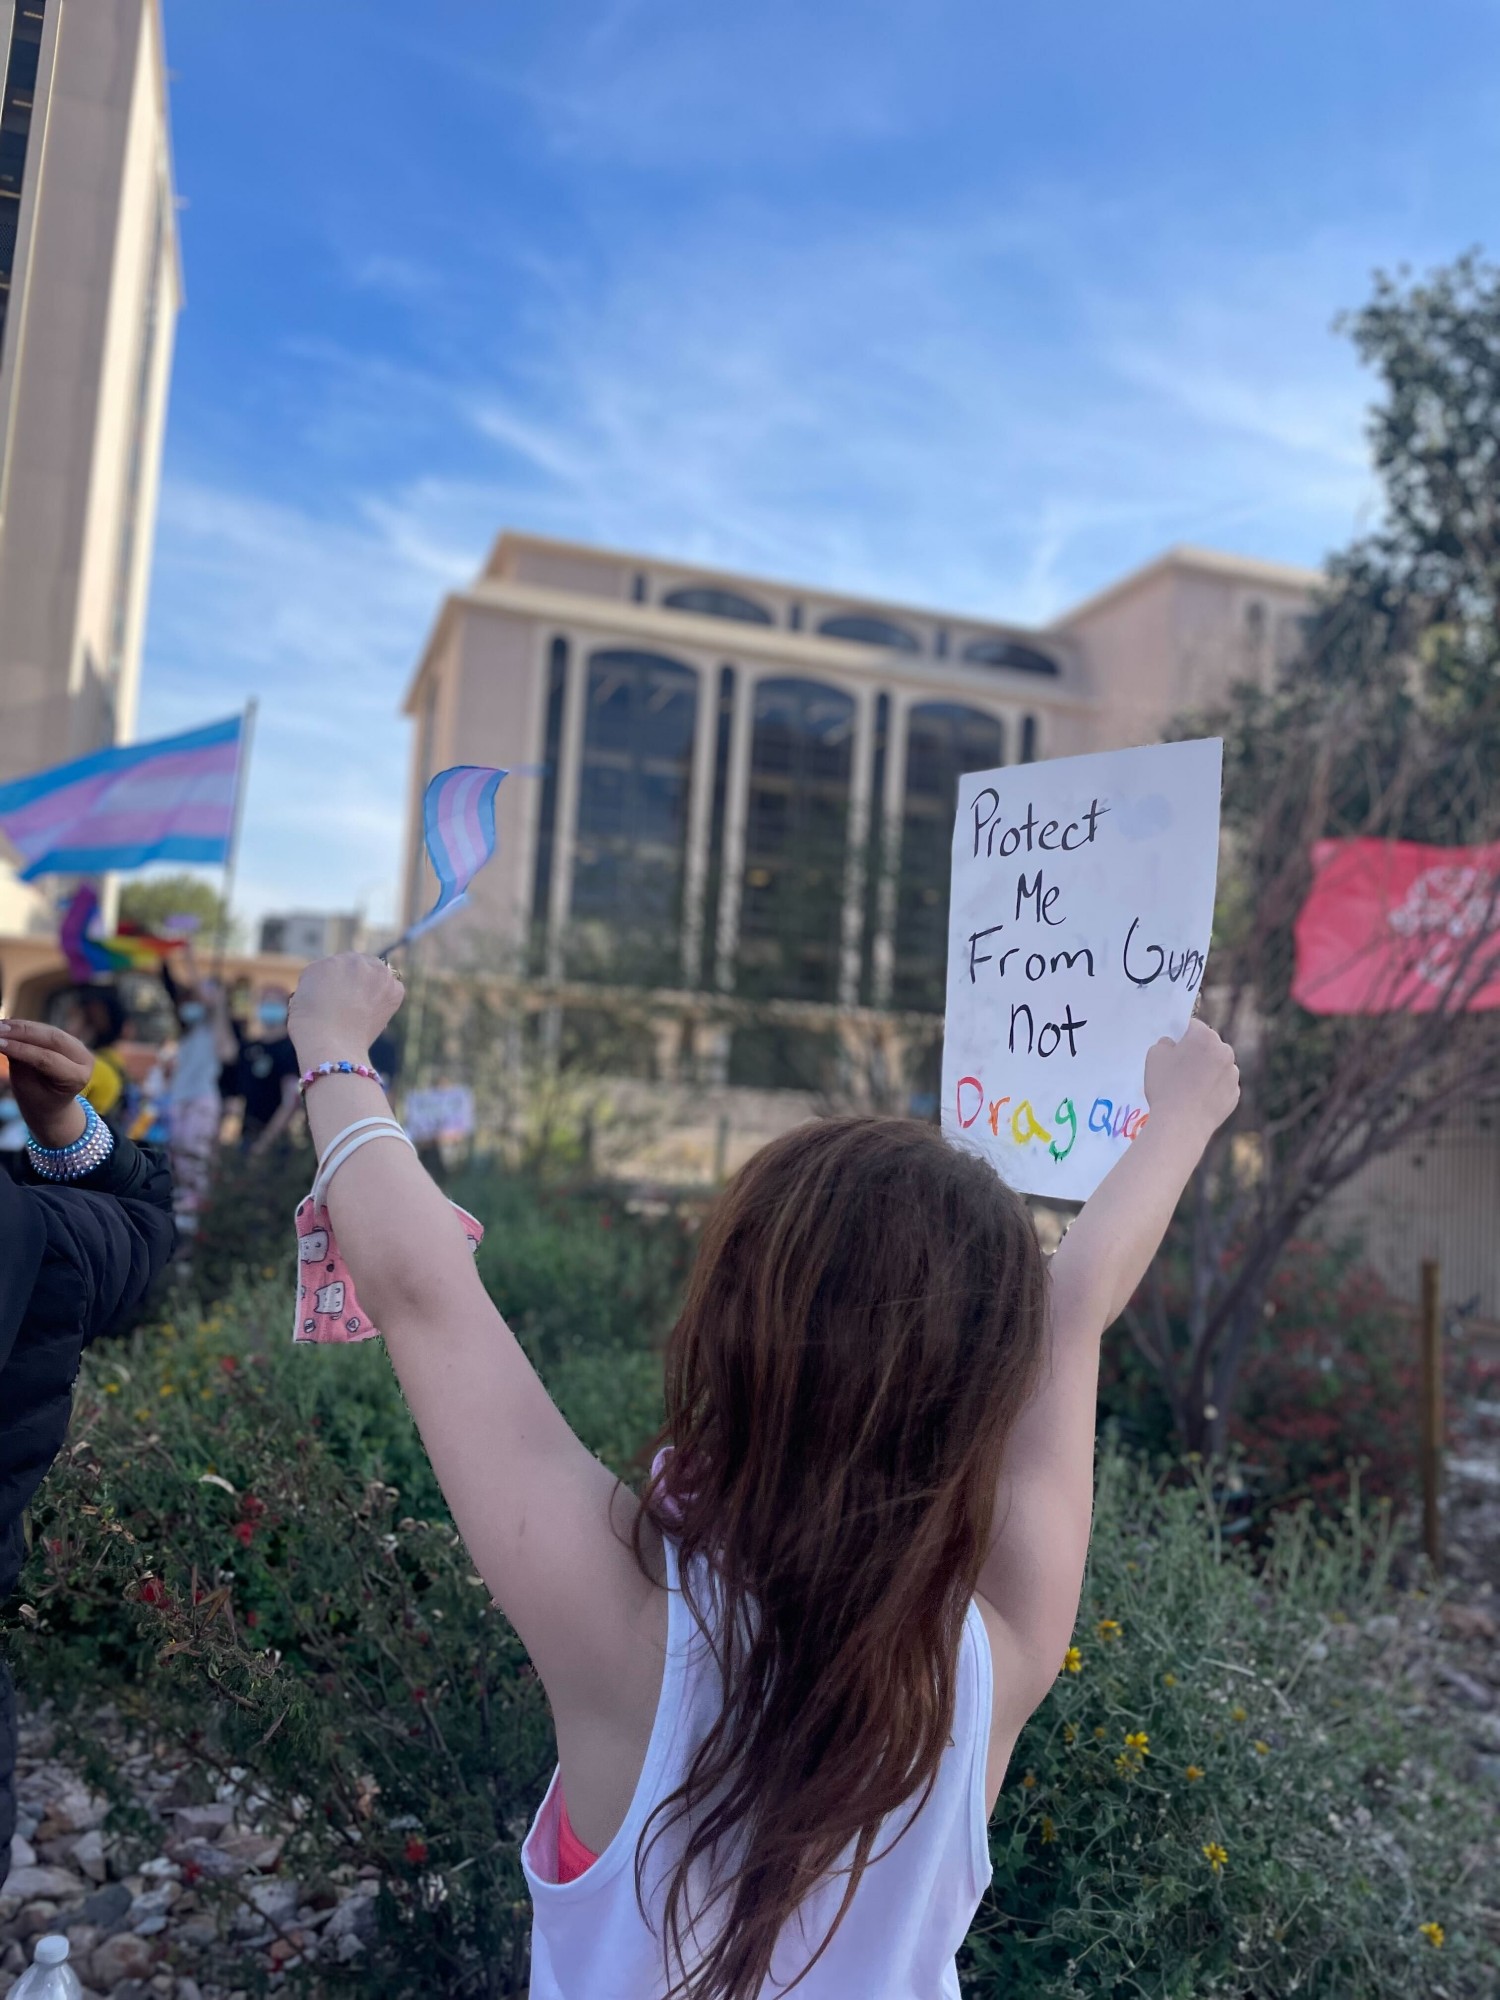 A young protestor holds up a sign that reads "protect me from guns, not drag queens" at the Trans Day of Visibility protest held March 31 in Downtown Tucson. Hundreds gathered at this event to demand action be taken by legislators to protect trans people.